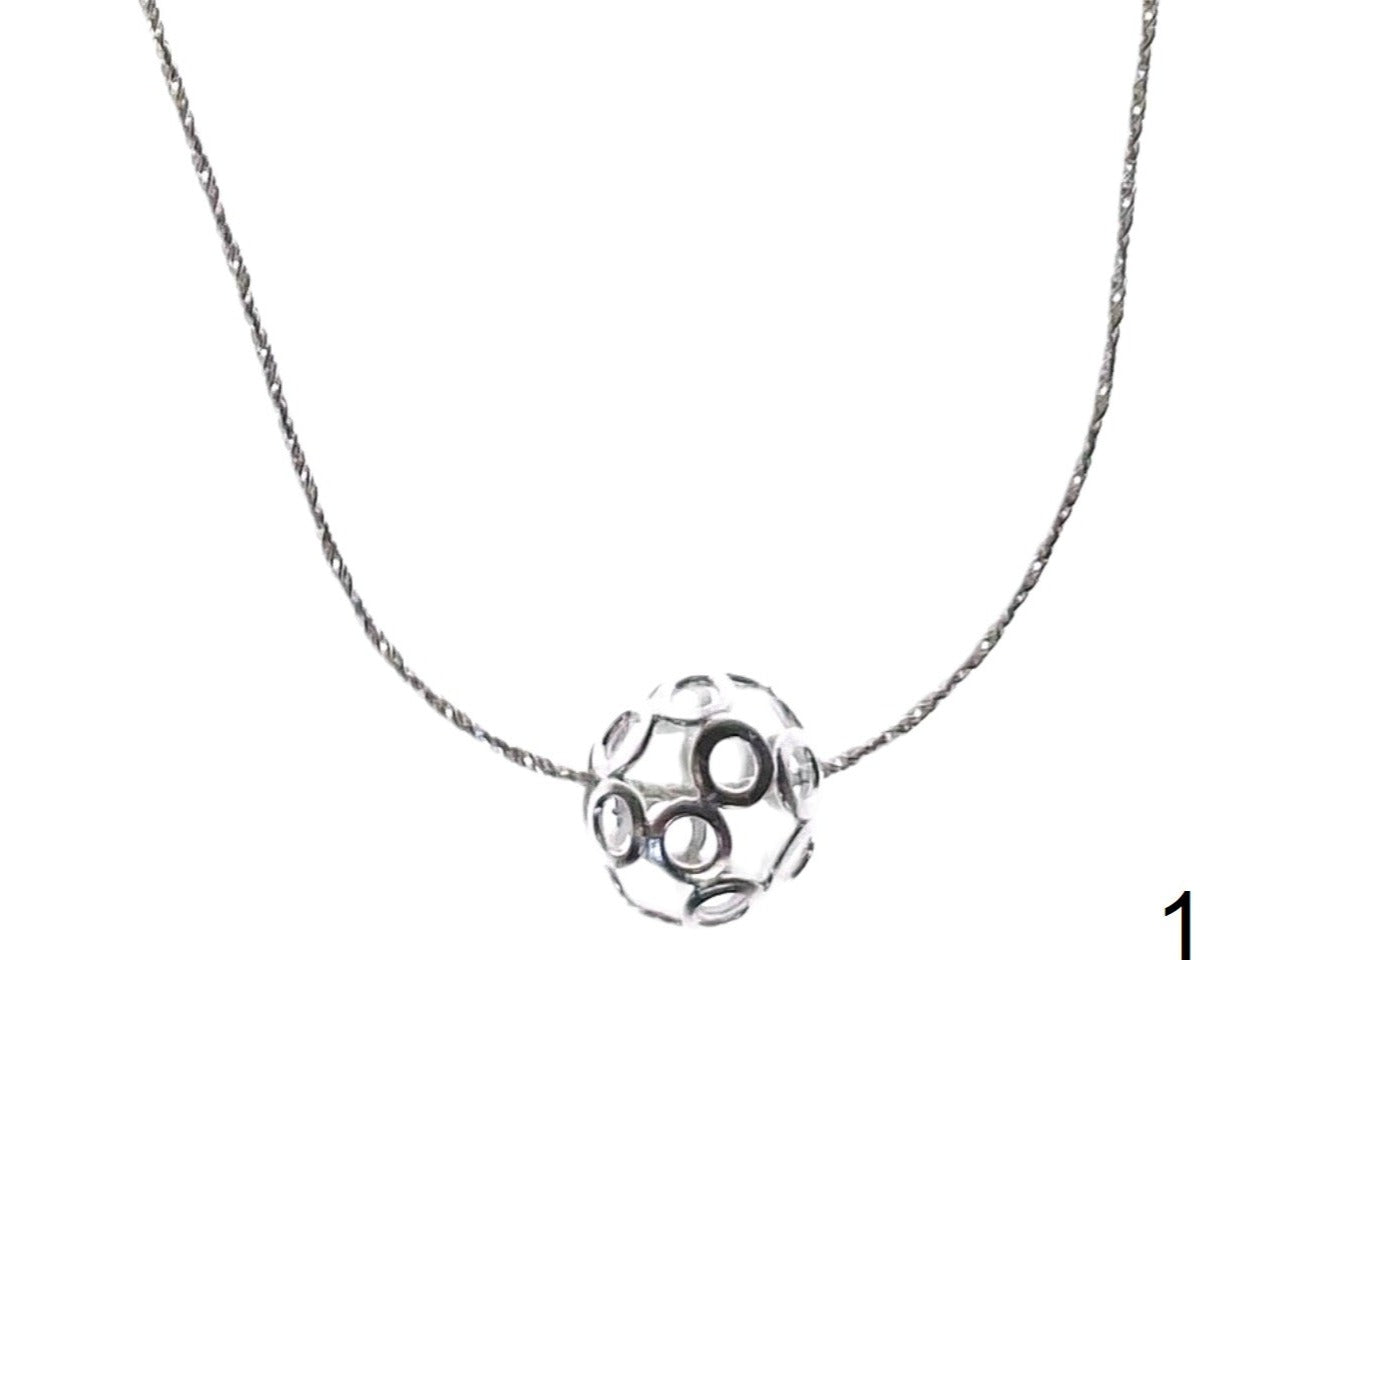 Small Ball Pendant Necklace